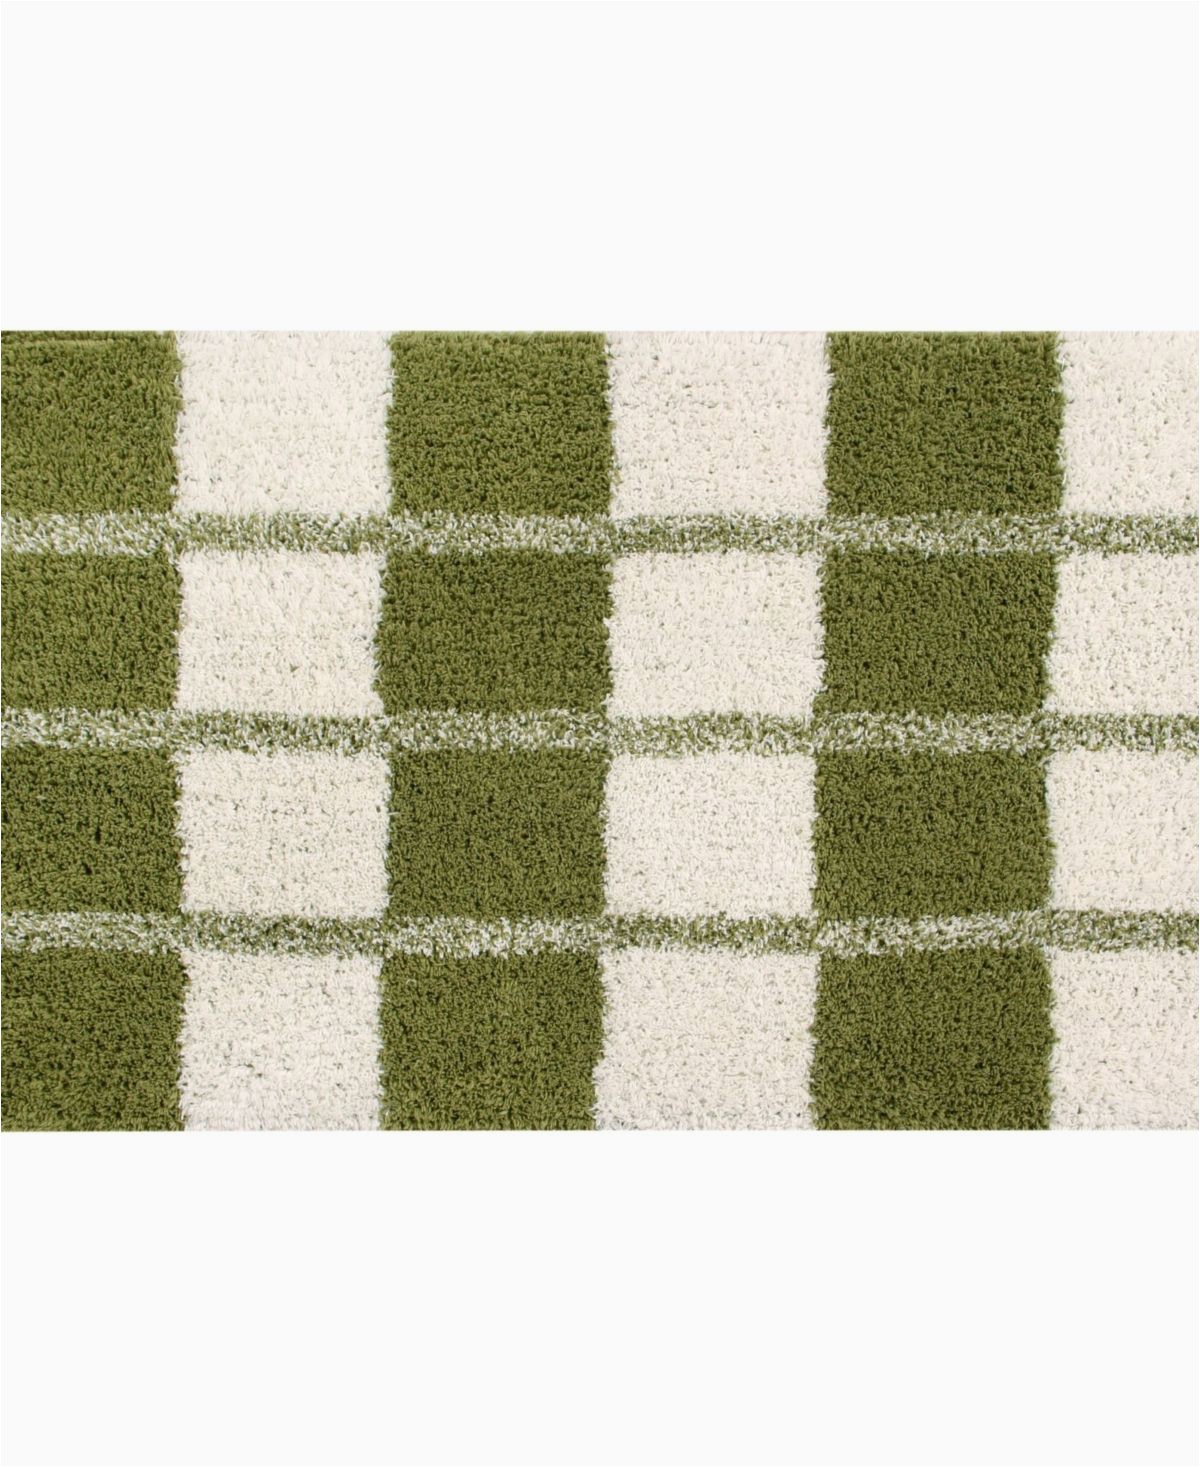 Green Bathroom Rugs On Sale Pin by Kerrie Mccarthy On the Green Room In 2020